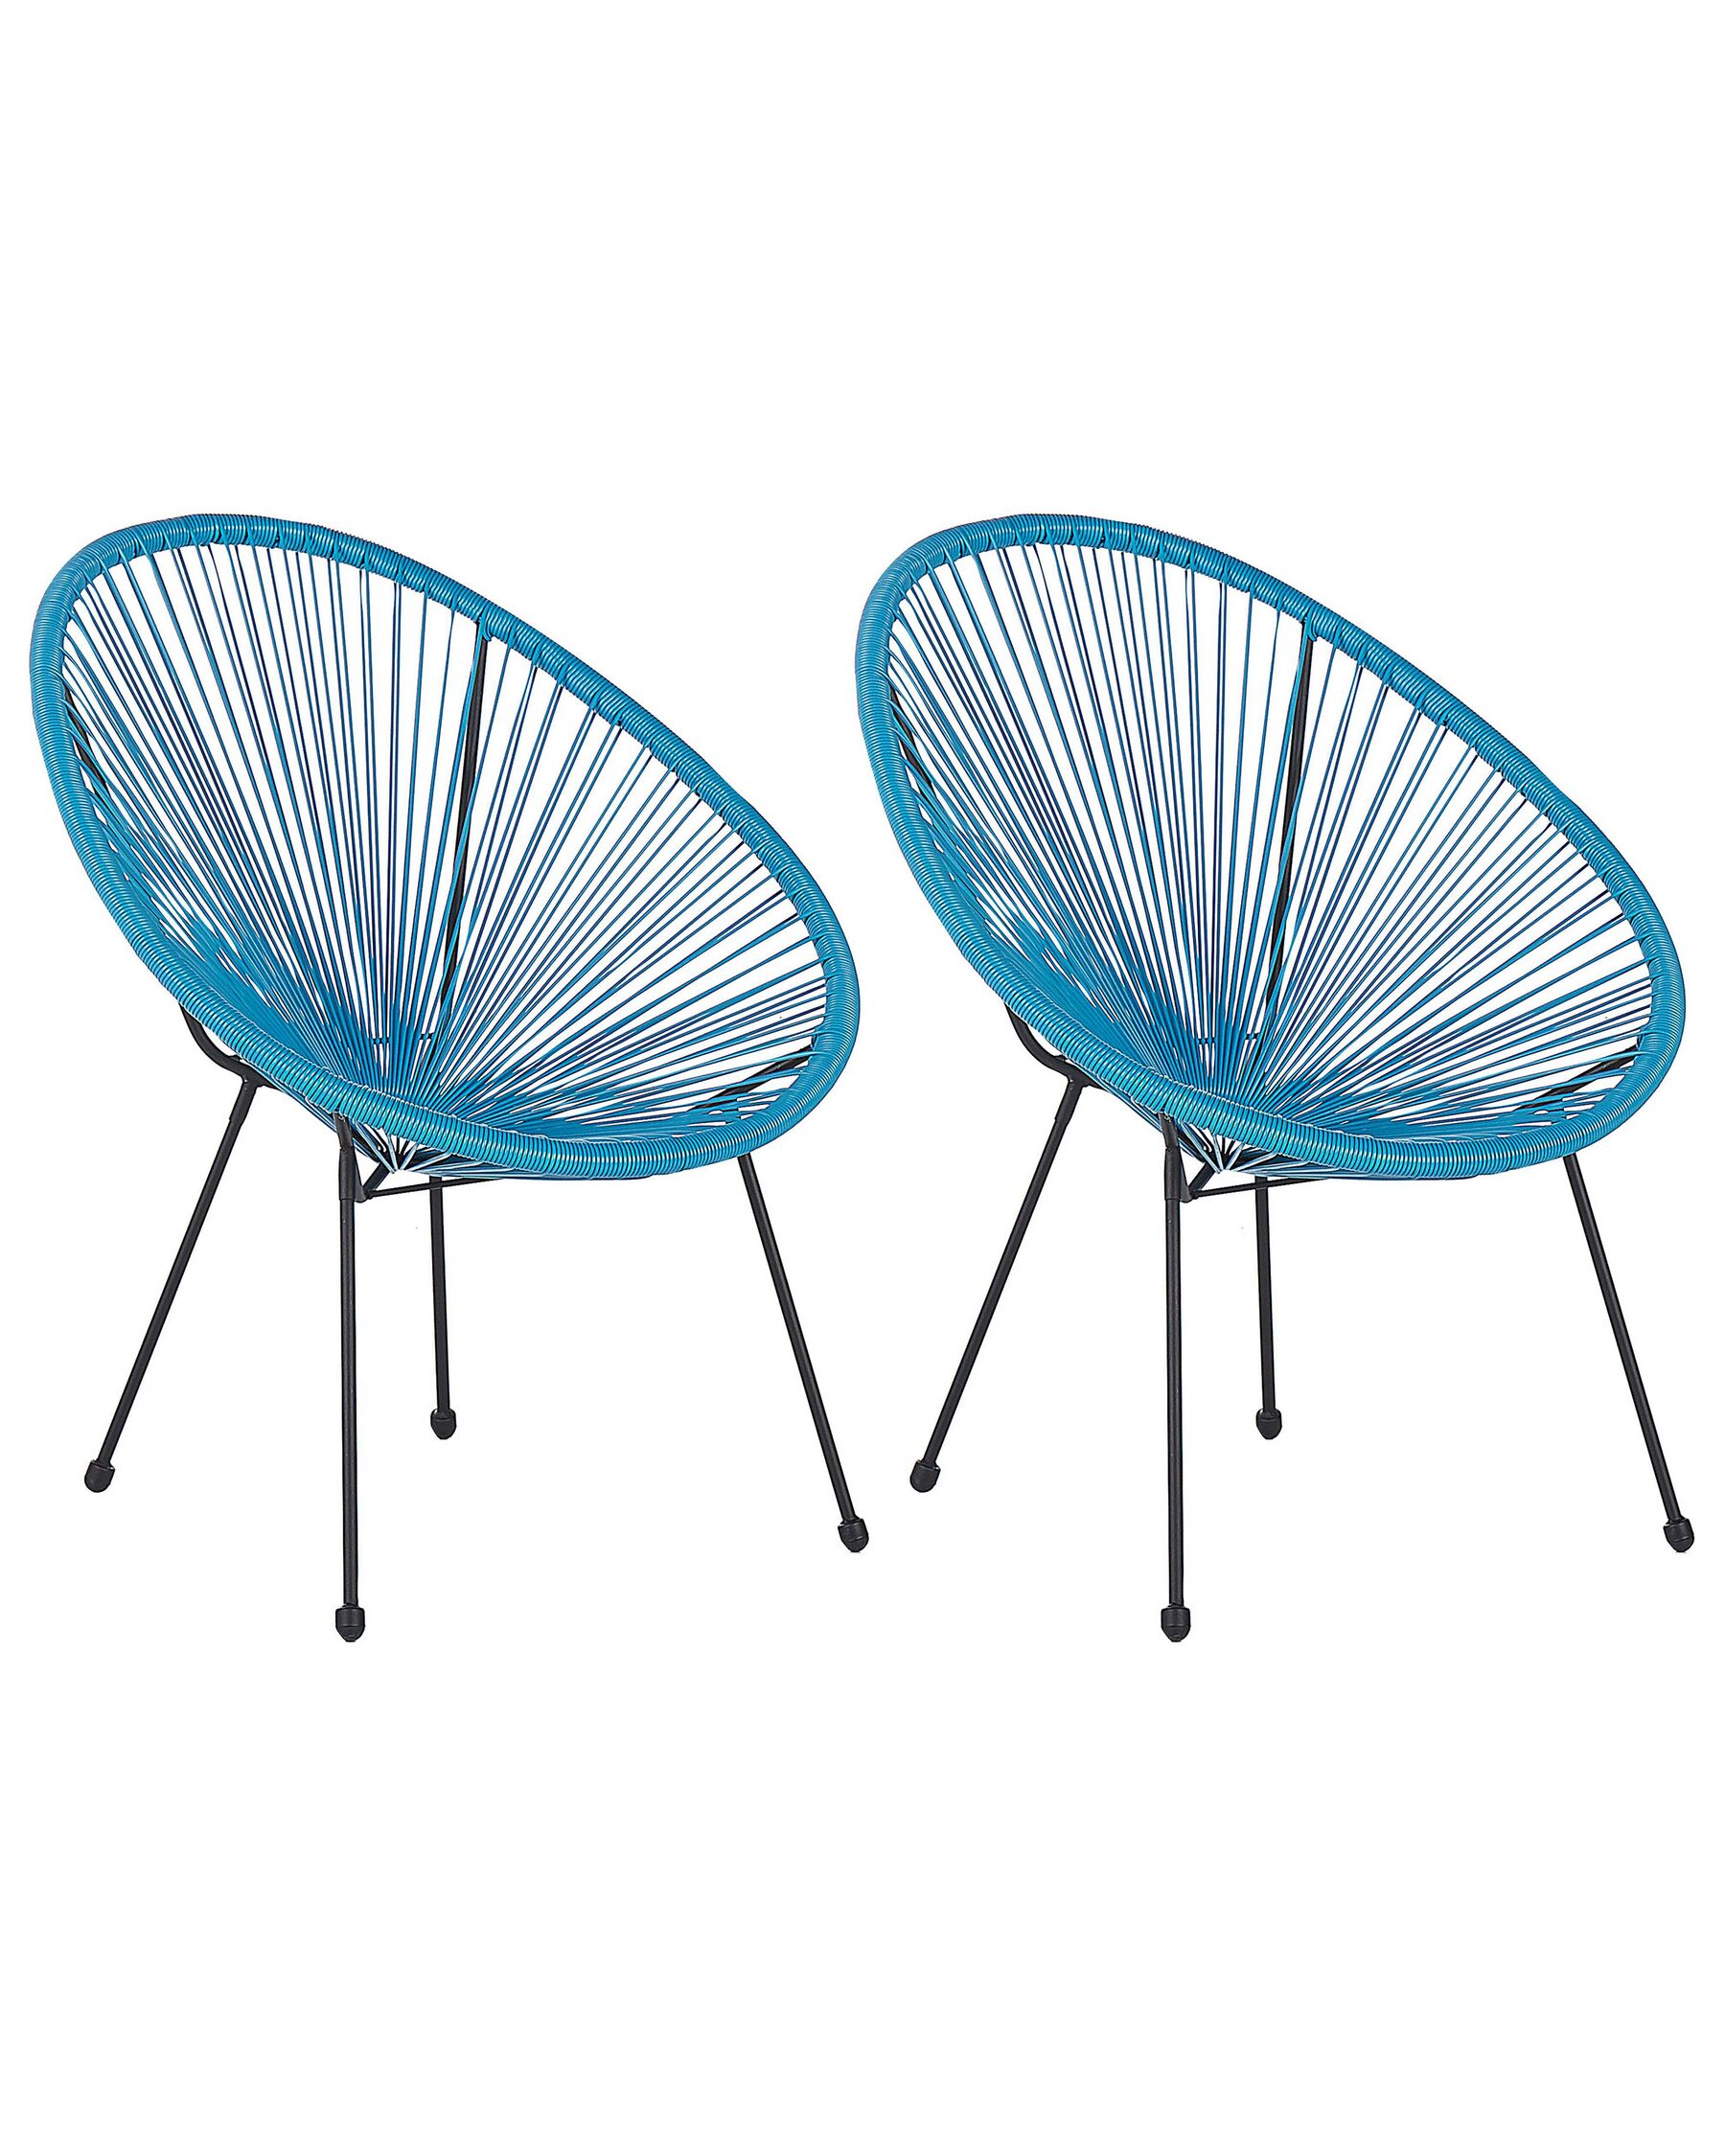 2 Accent Chair Set Round Rattan Weave Steel Living Room Blue Acapulco II